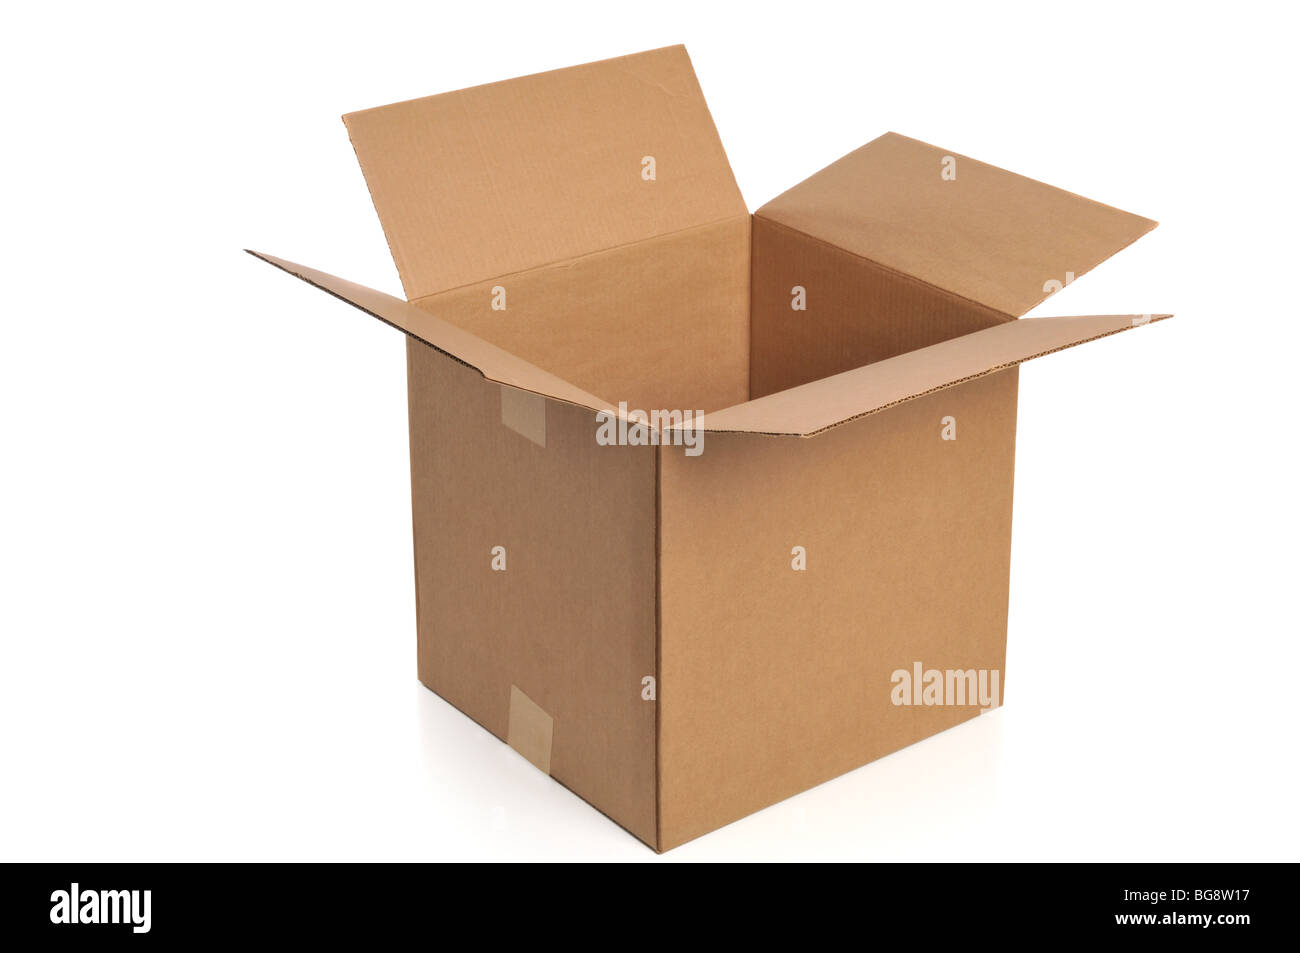 Cardboard box opened isolated on a white background Stock Photo